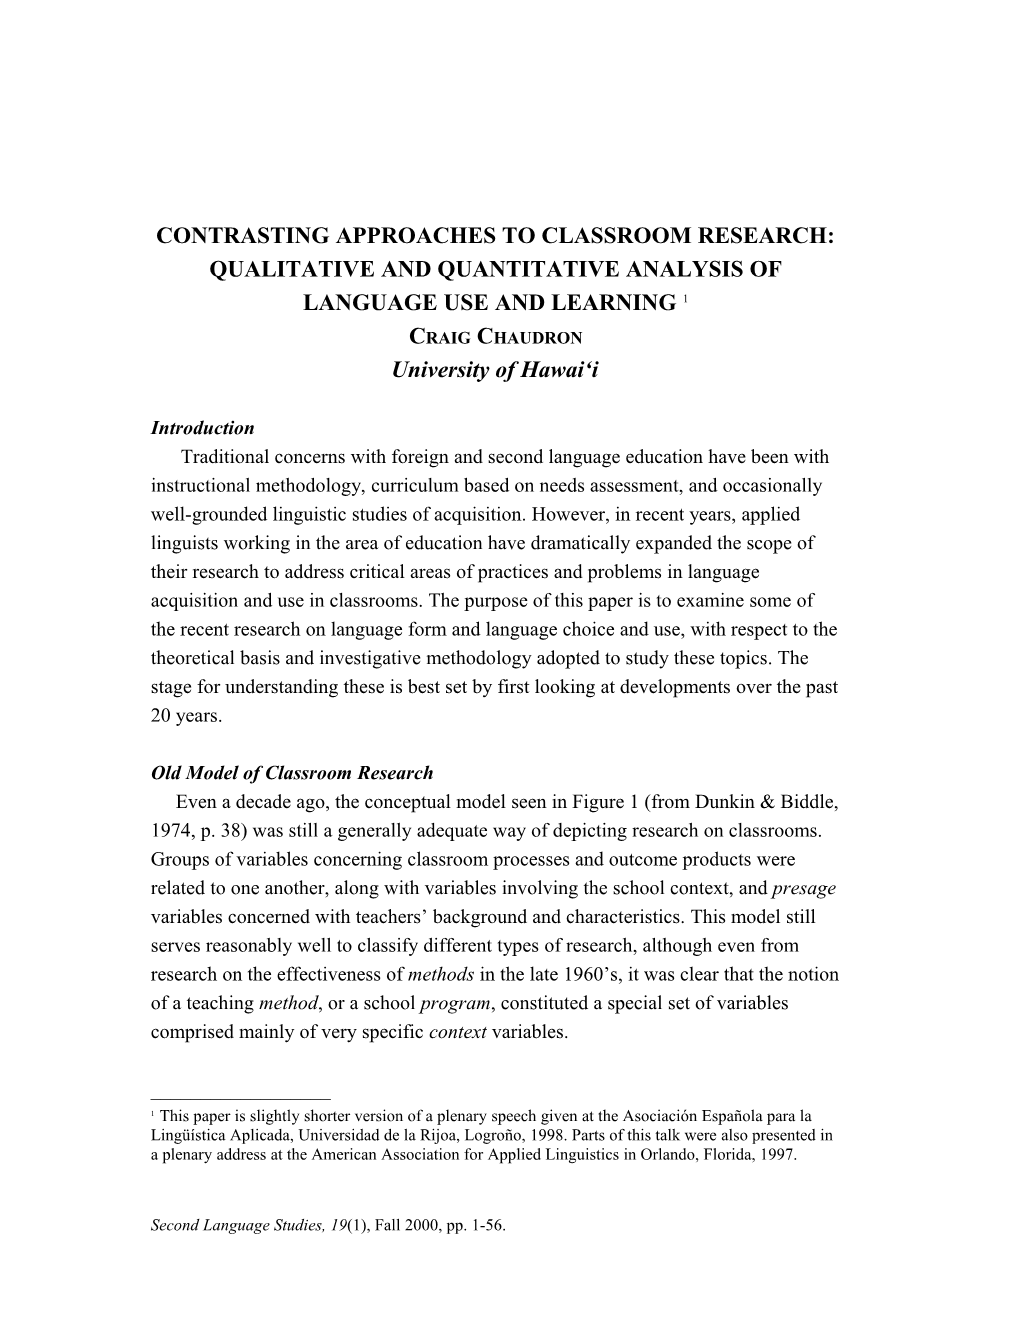 Contrasting Approaches to Classroom Research: Qualitative and Quantitative Analysis Of